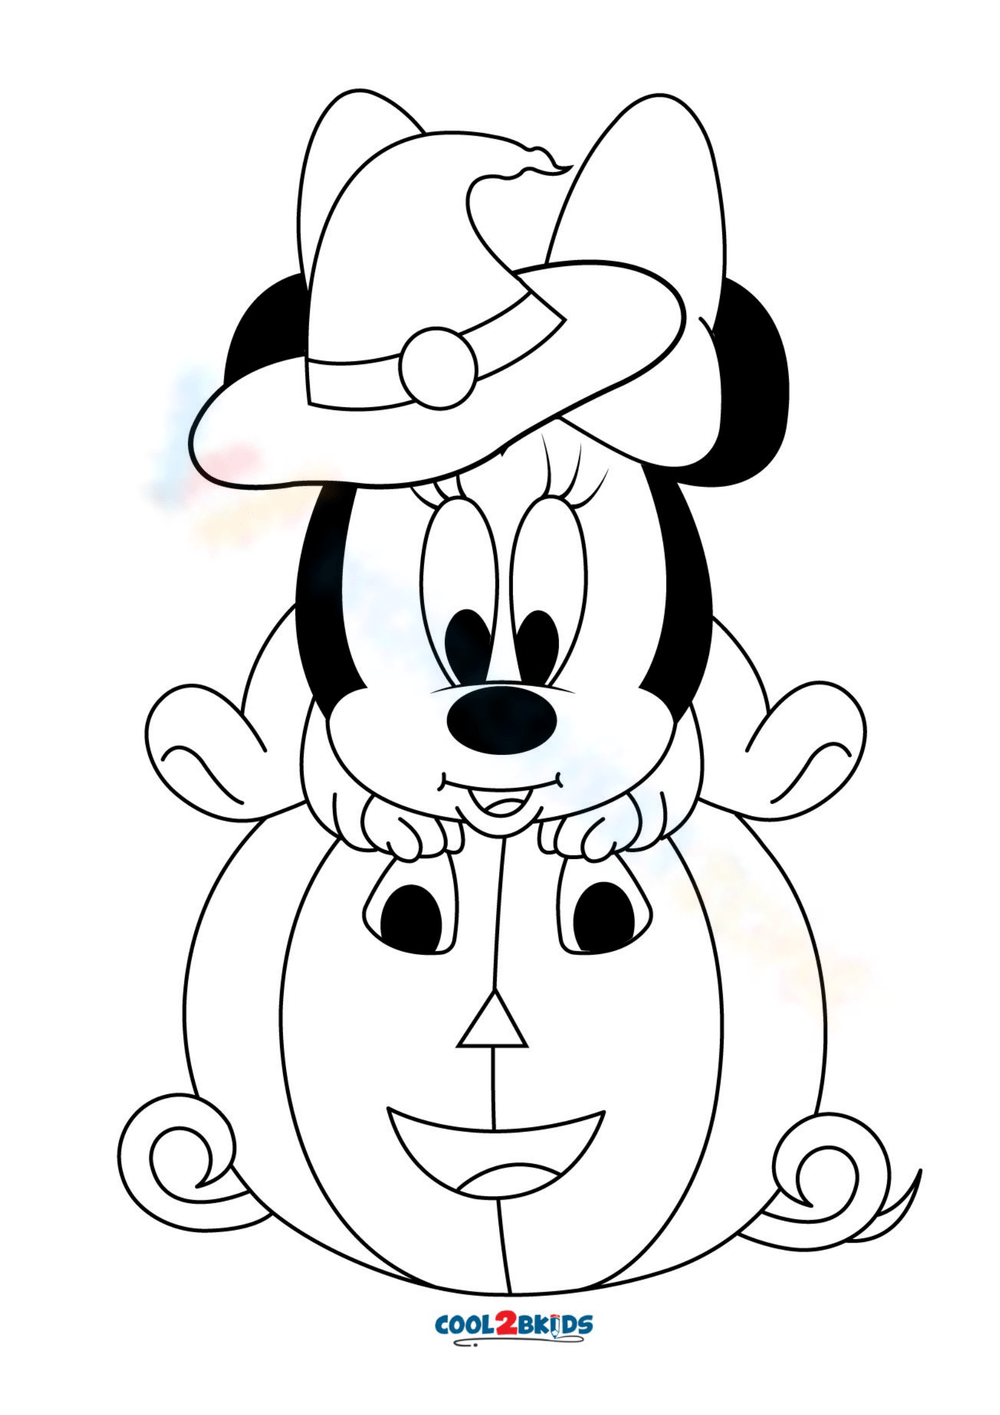 Printable disney halloween coloring pages for all ages